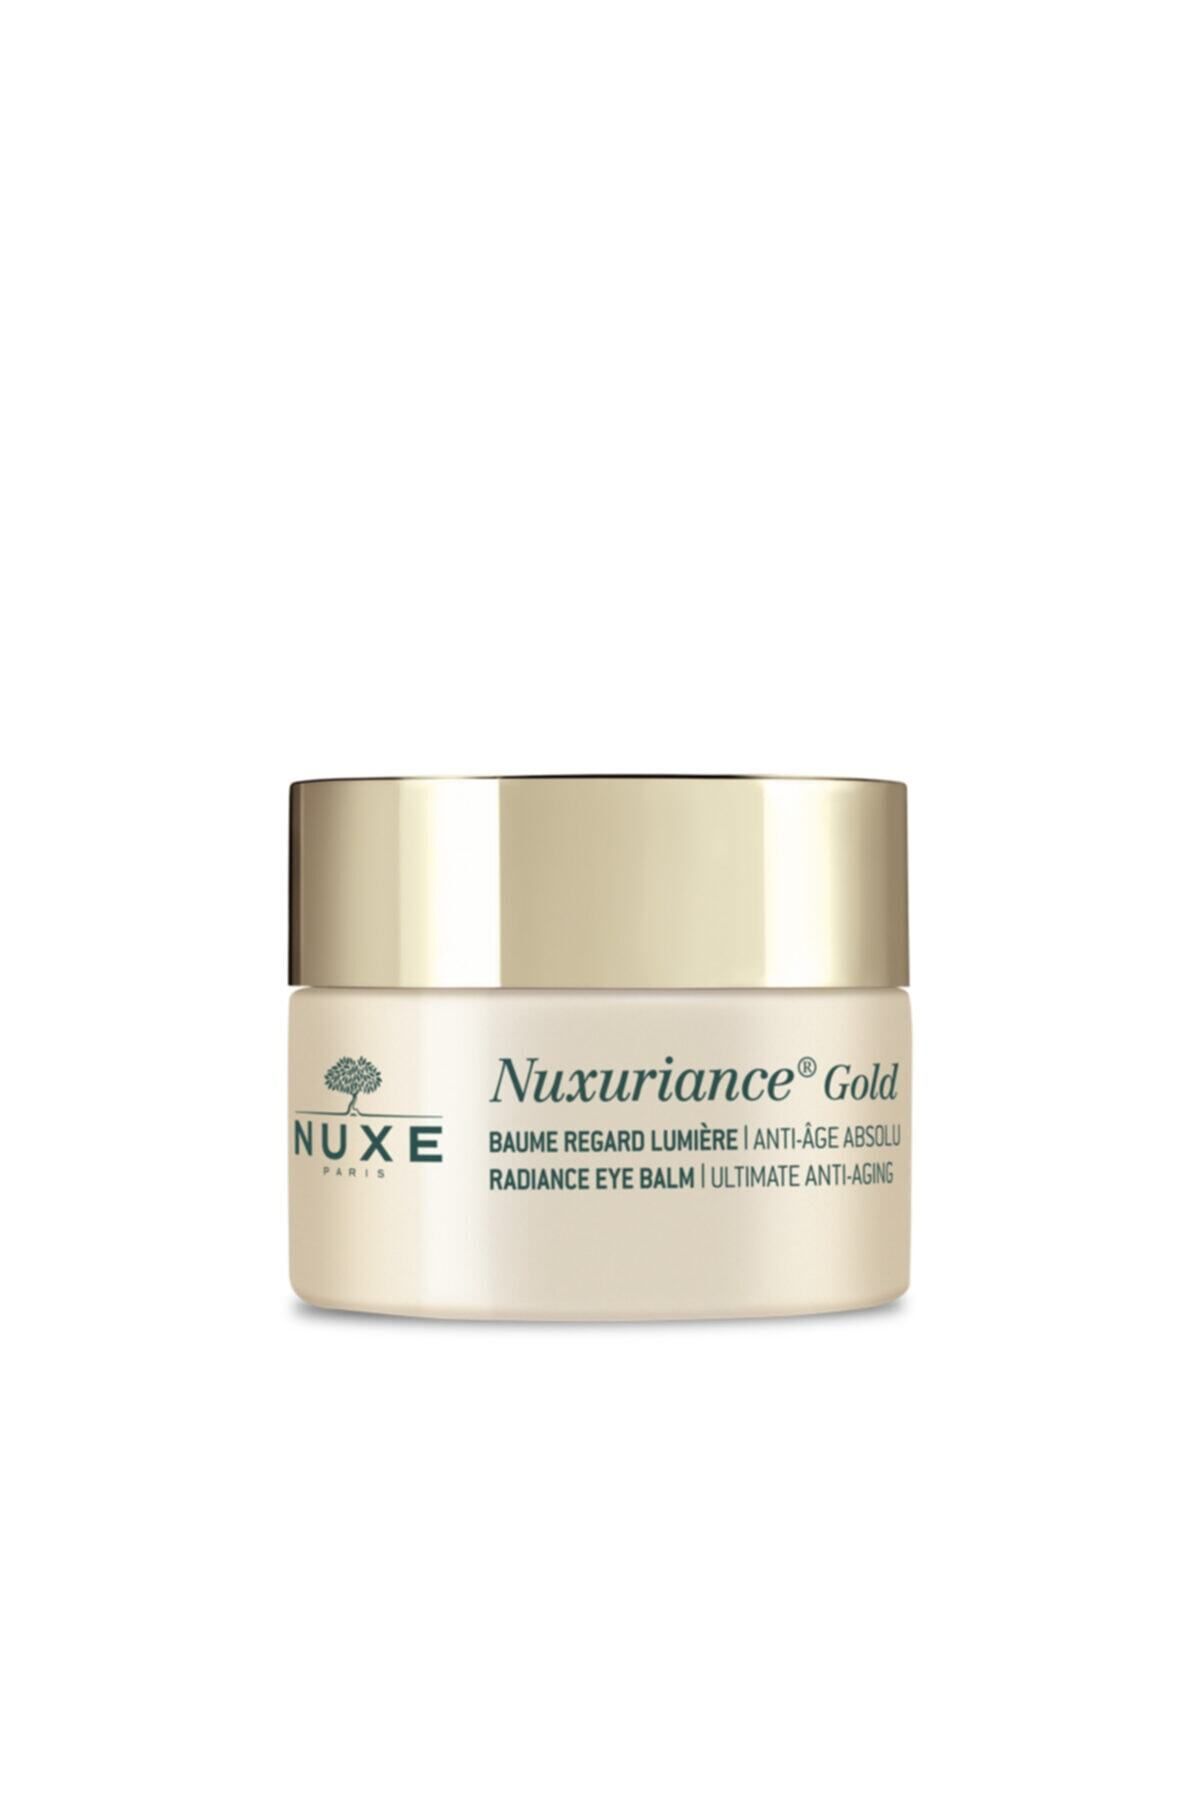 Nuxe Nuxuriance Gold Anti-Aging Eye Contour Care Cream that Brightens the Eye Contour 15ml Shooting536